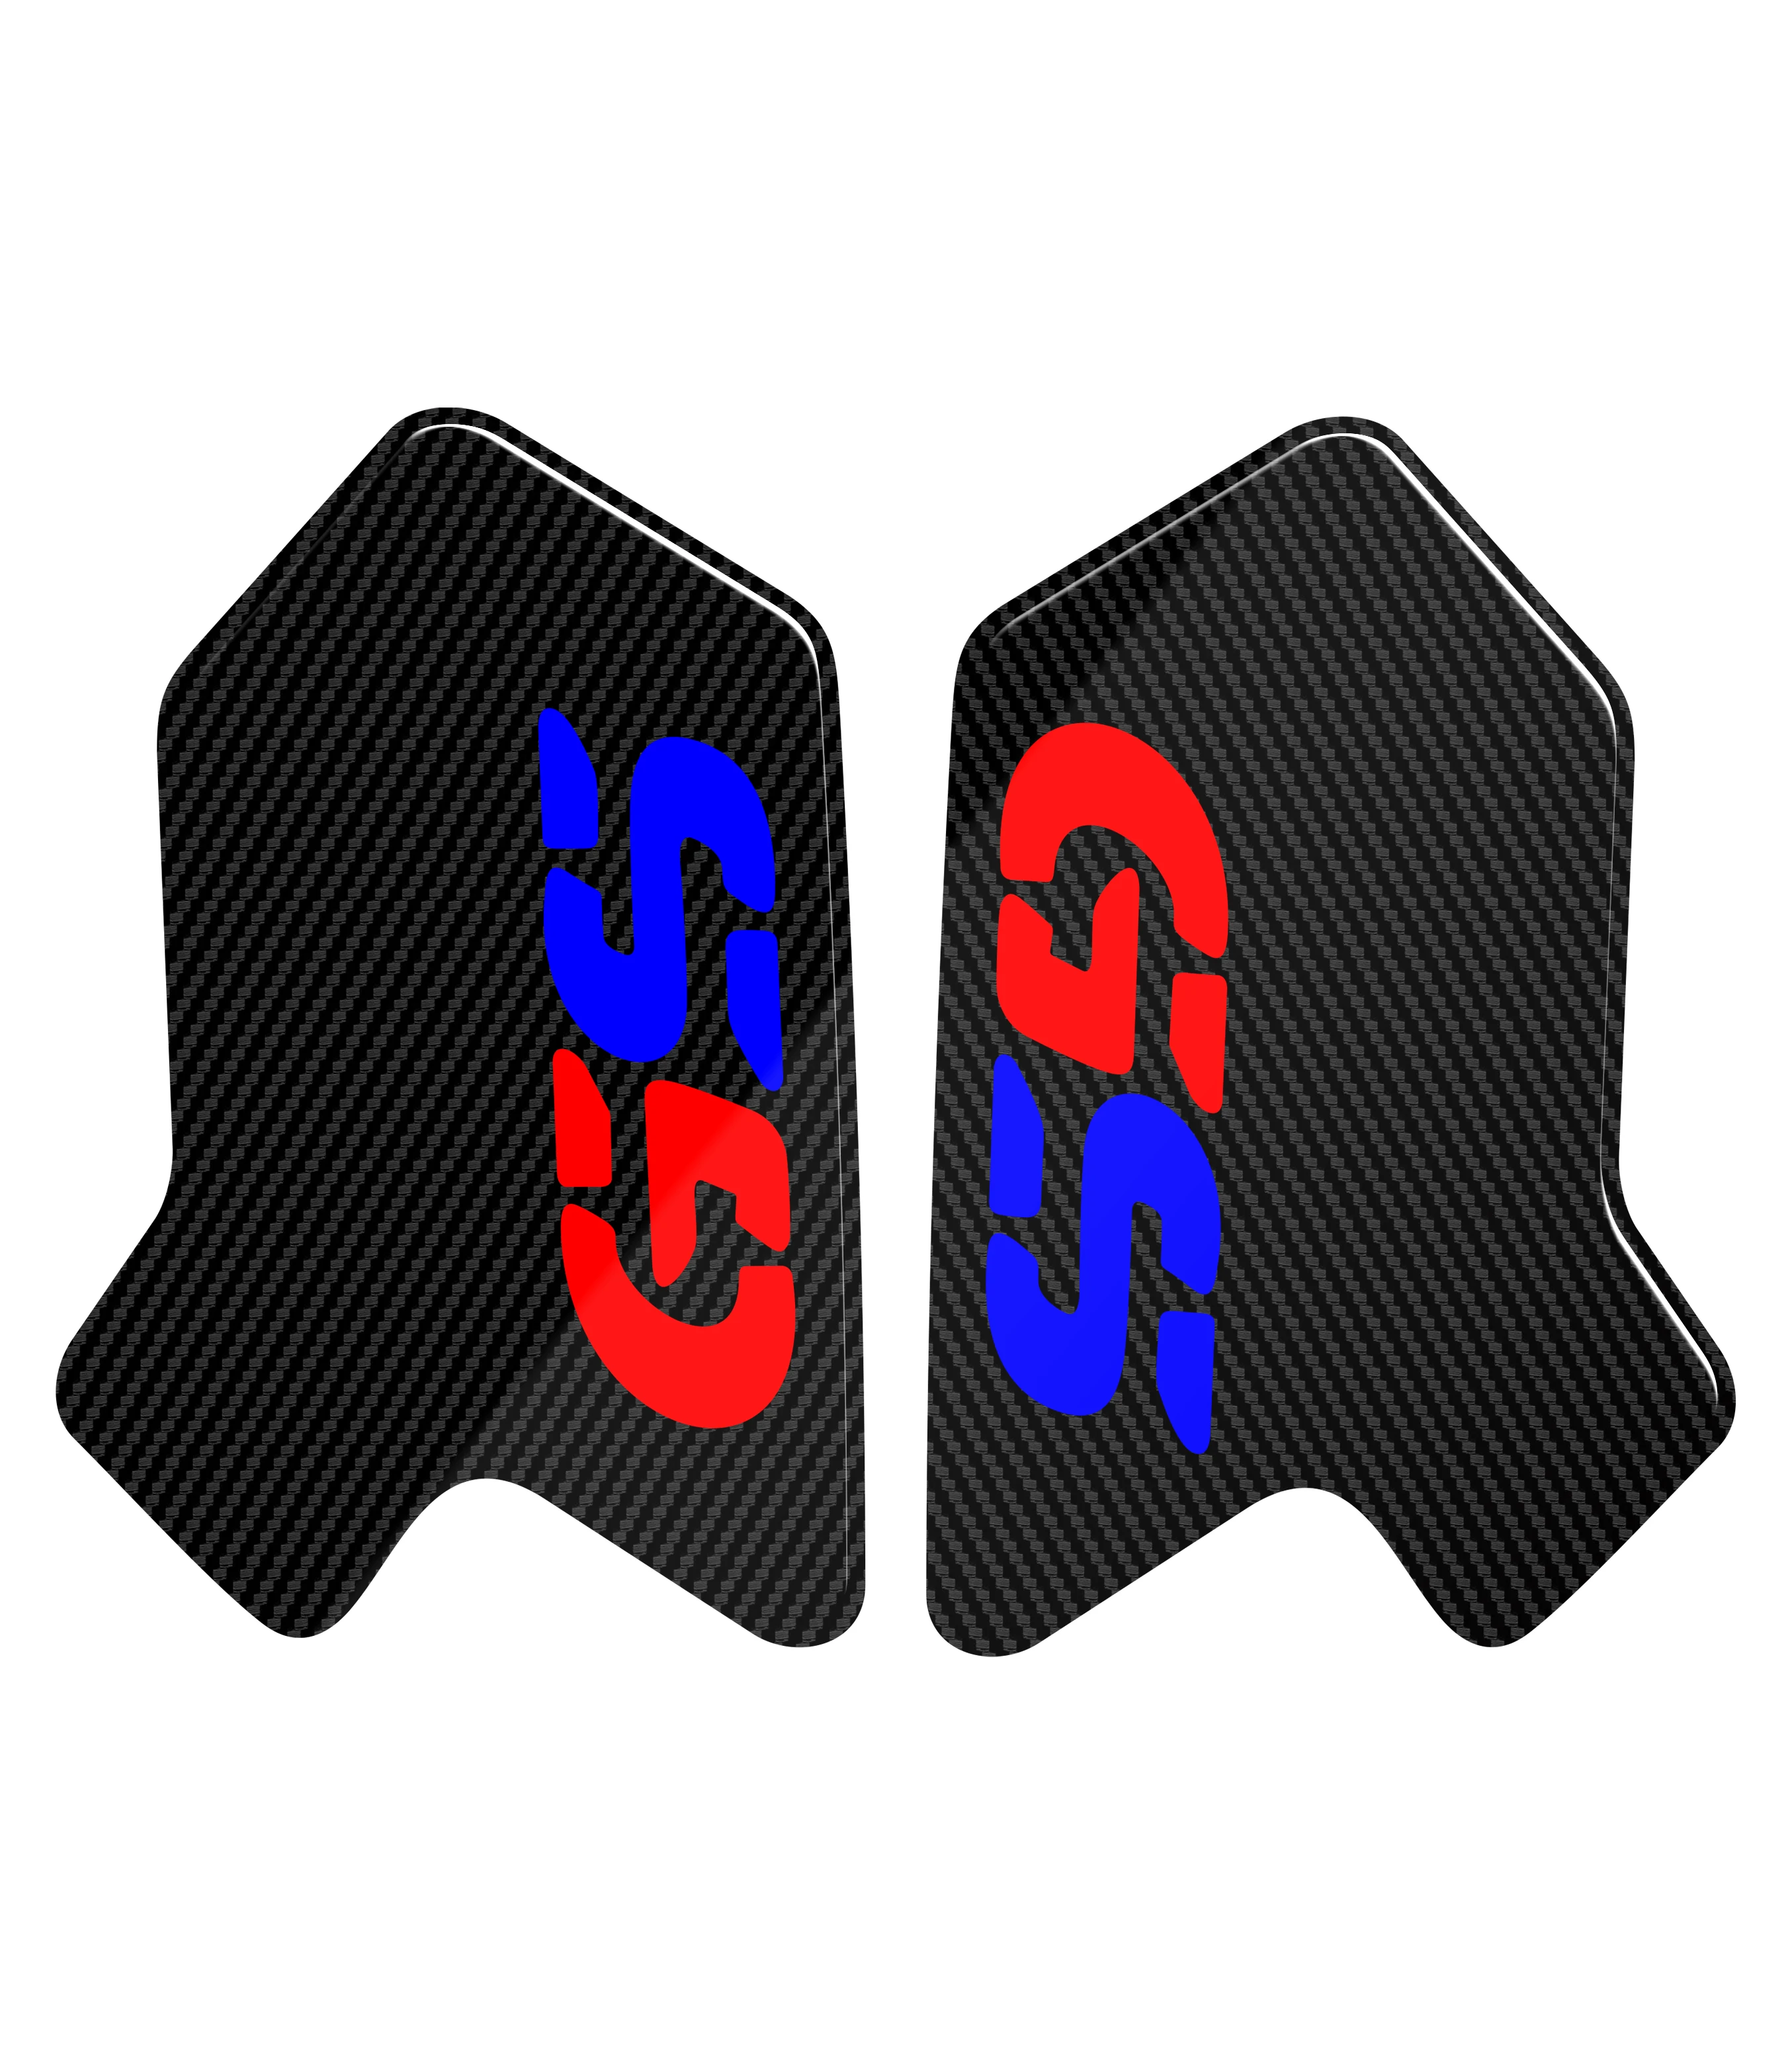 For BMW Motorrad R1200GS 2014-2018 / R1250GS ADV 2019-2022 Motorcycle Accessorie Side Tank Pad Protection Knee Grip Traction motorcycle accessorie side tank pad protection knee grip traction for bmw motorrad r1200gs hp 2019 2022 r1250gs 2019 2022